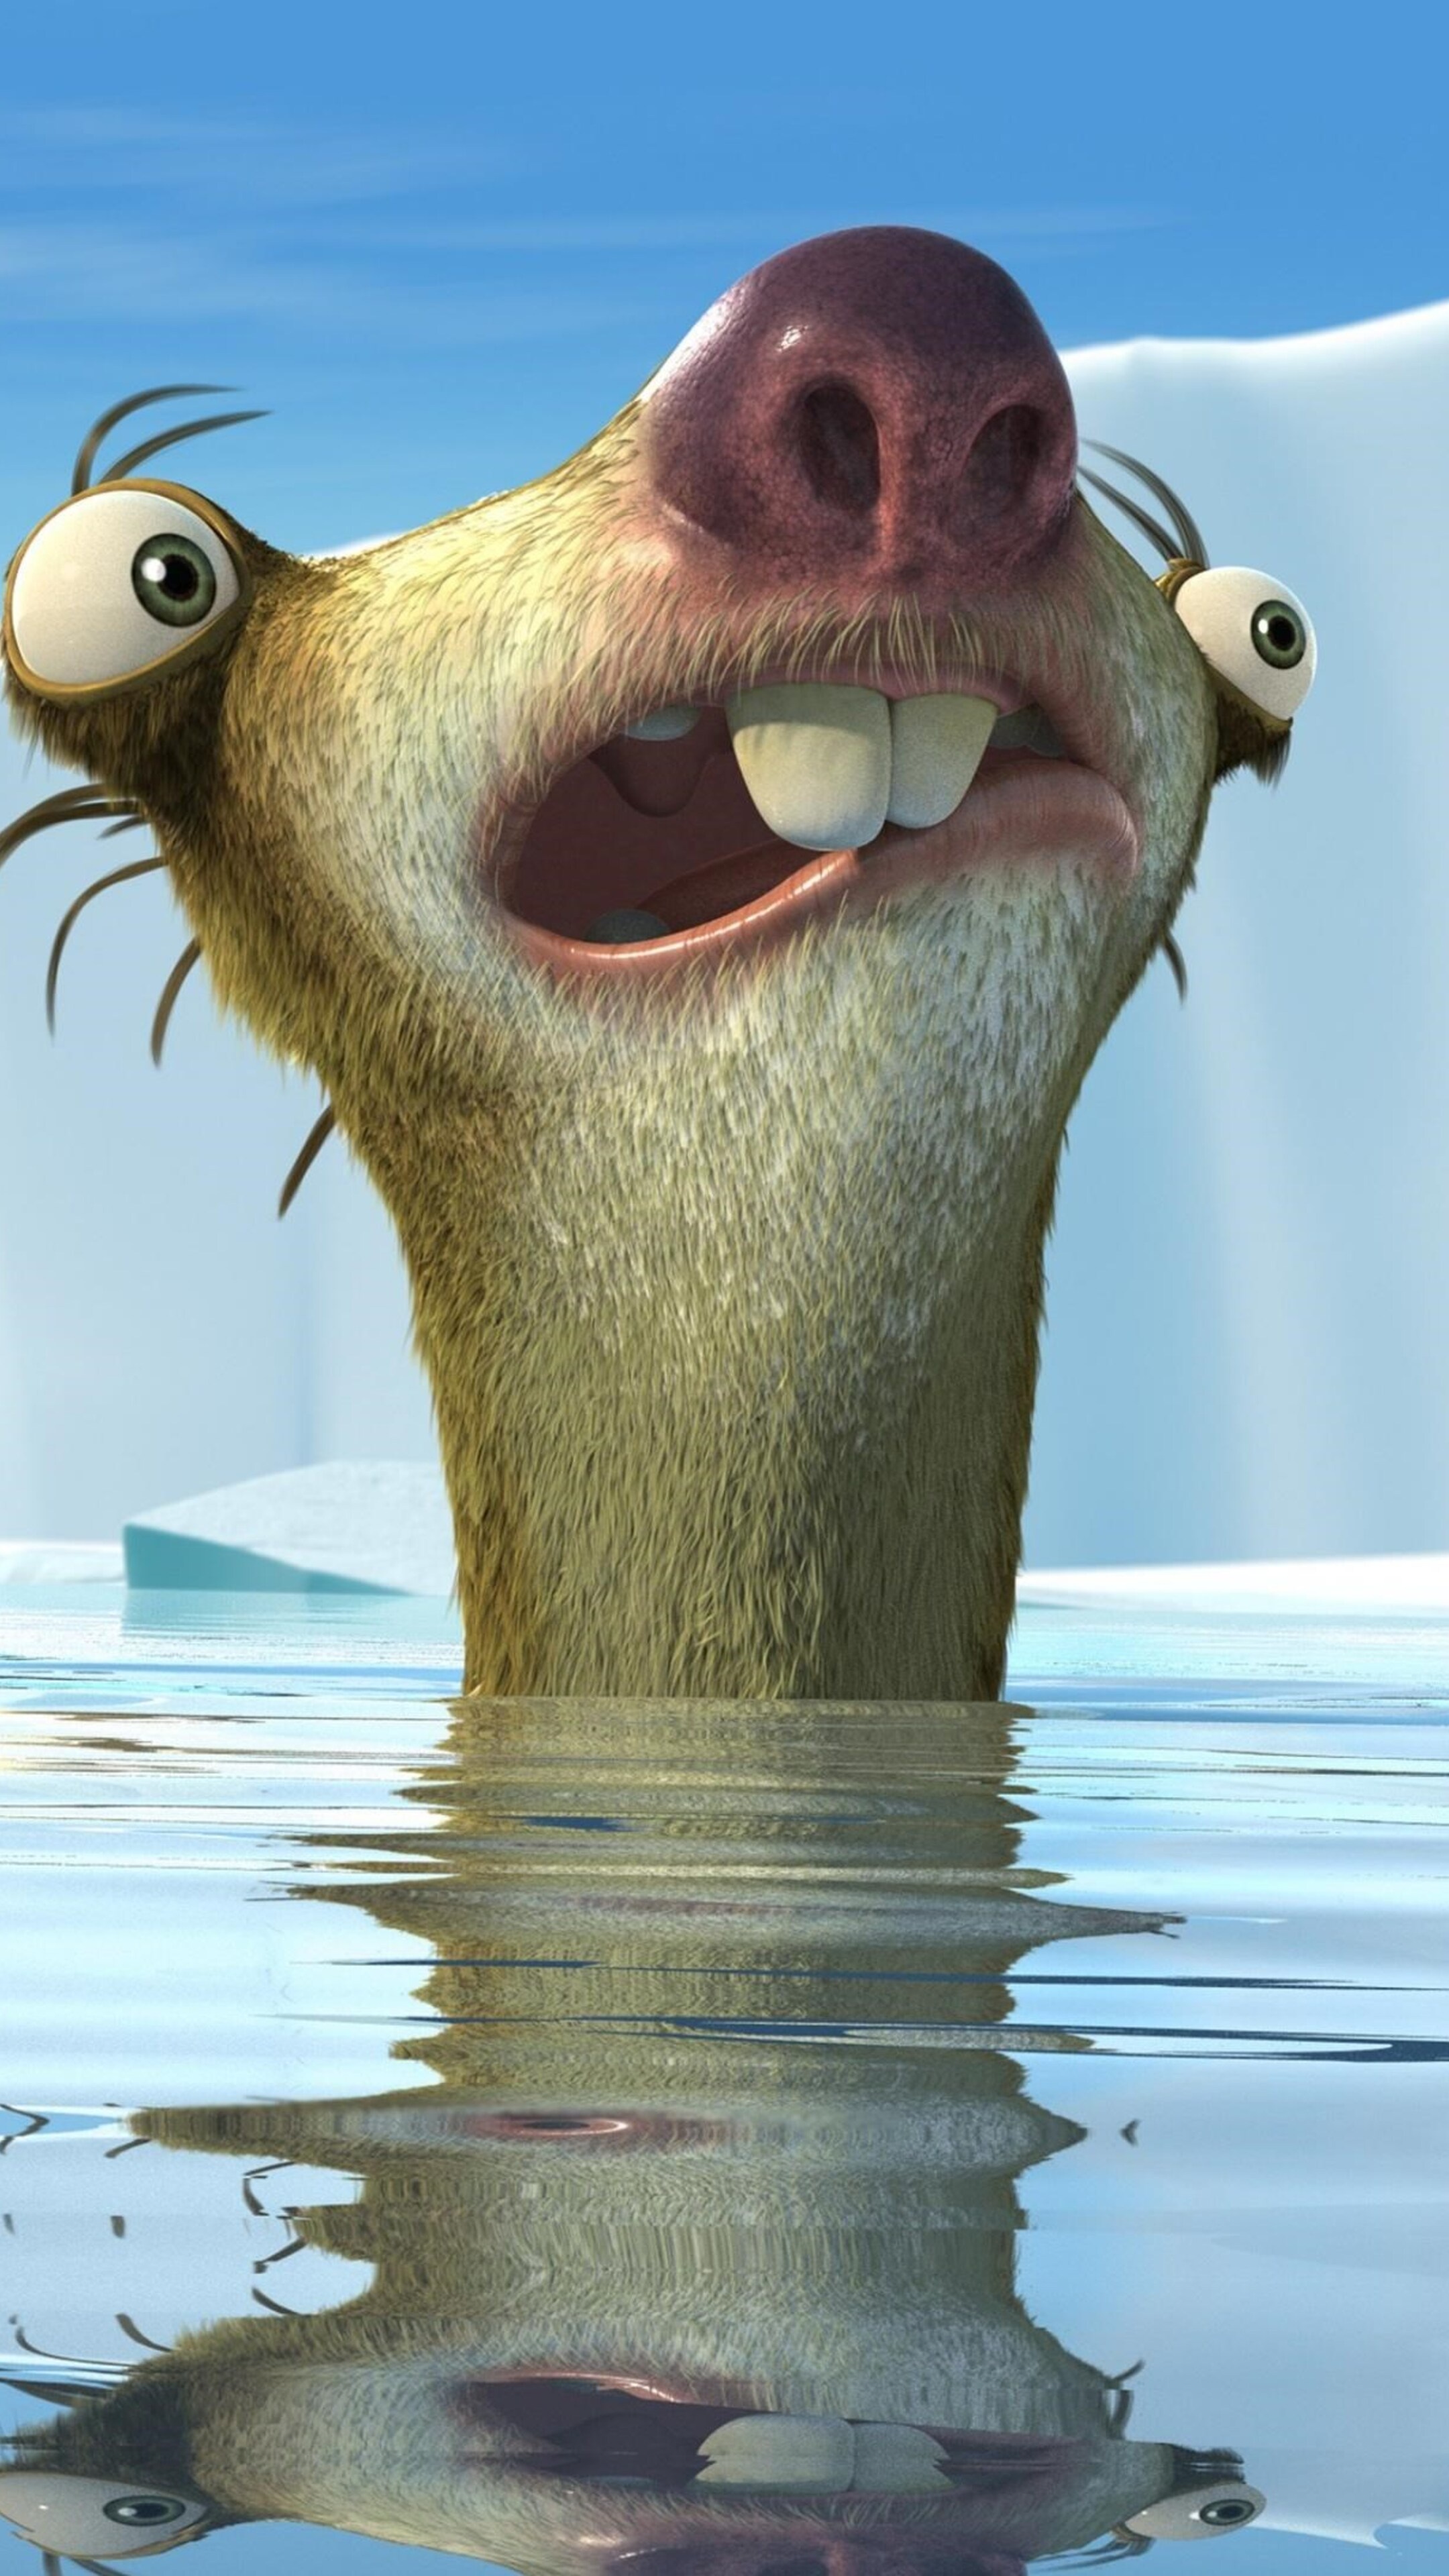 Ice Age 5 Sid Sony Xperia X, XZ, Z5 Premium HD 4k Wallpapers, Images, Backgrounds, Photos and Pictures 2160x3840